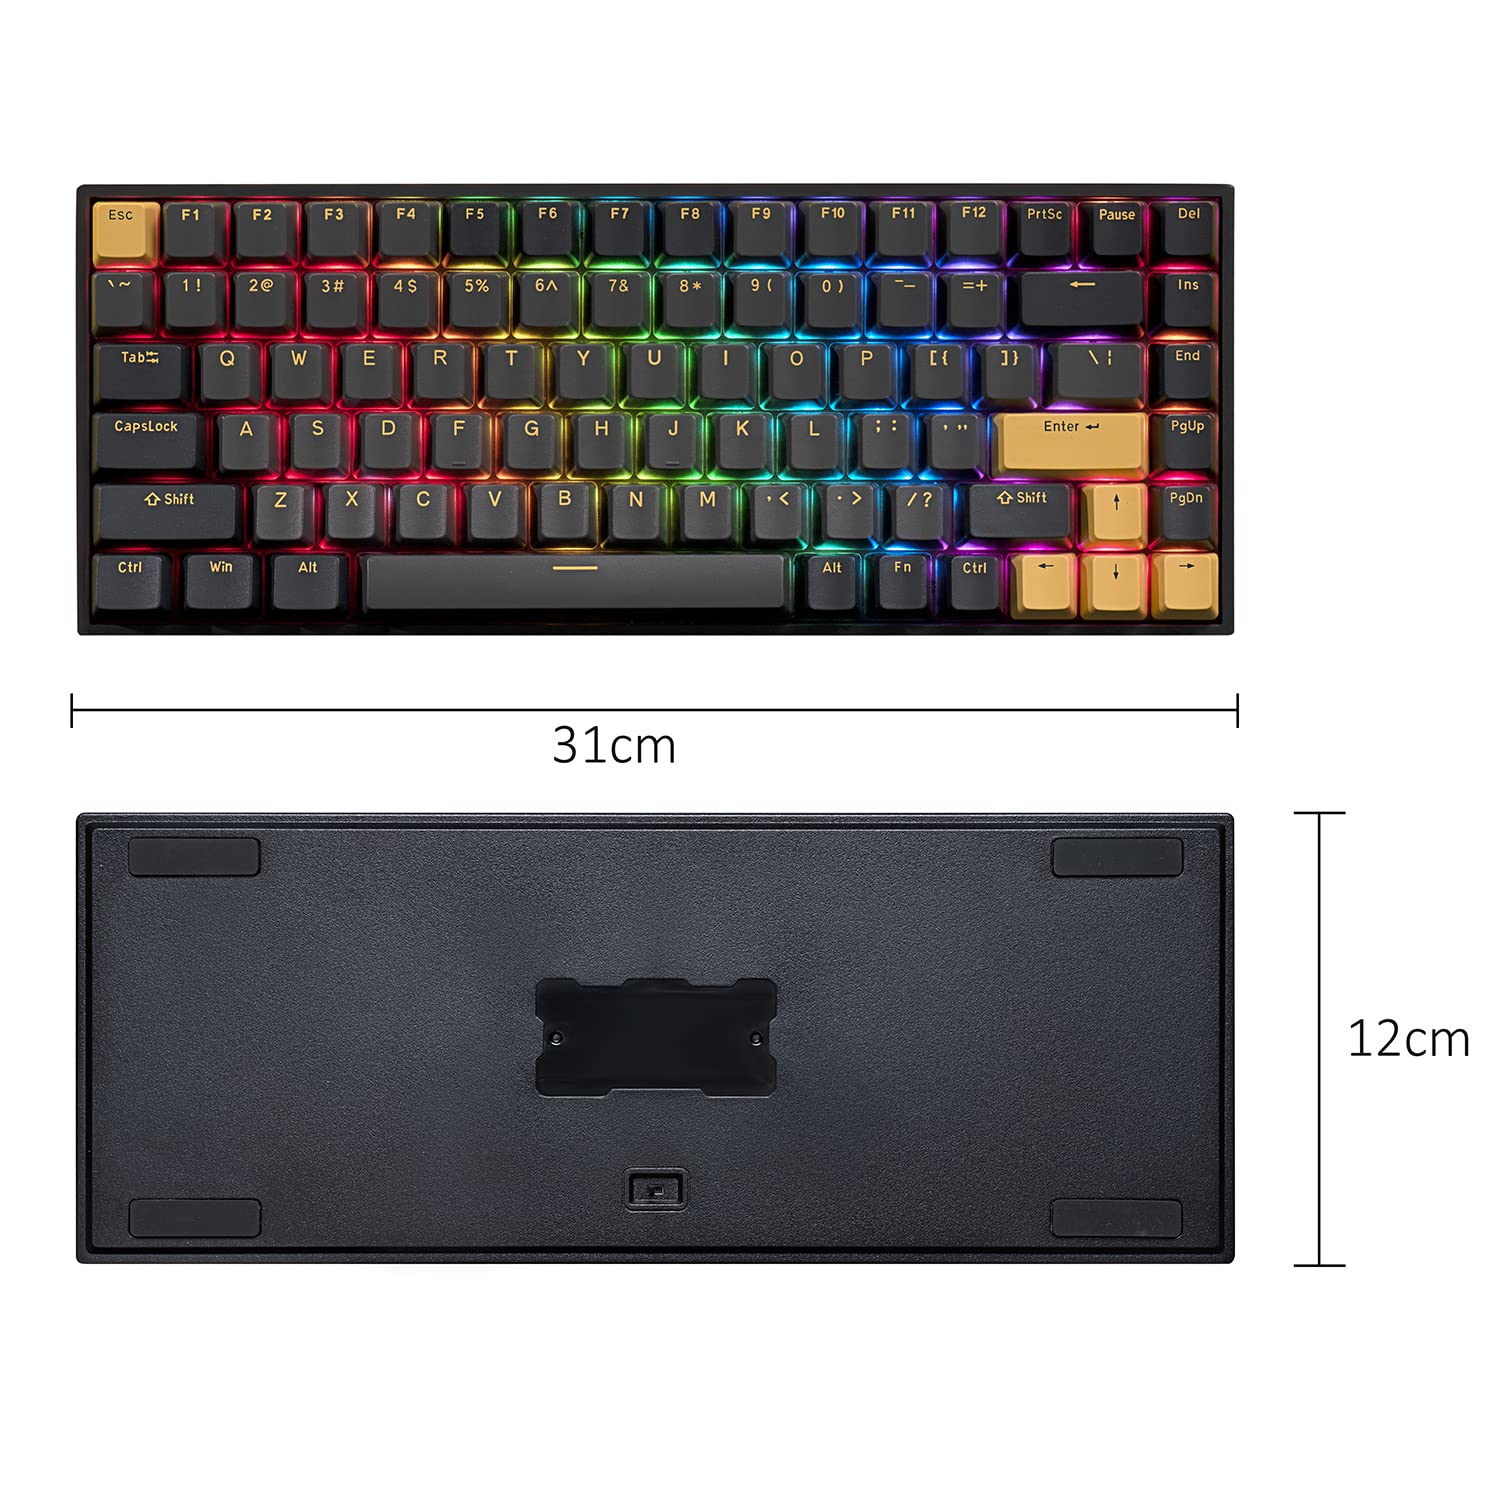 ONE METER 75% Wireless Mechanical Keyboard, Hot Swappable Mechanical Gaming Keyboard with Gateron G-Pro Switch and PBT Keycaps RGB LED Backlit